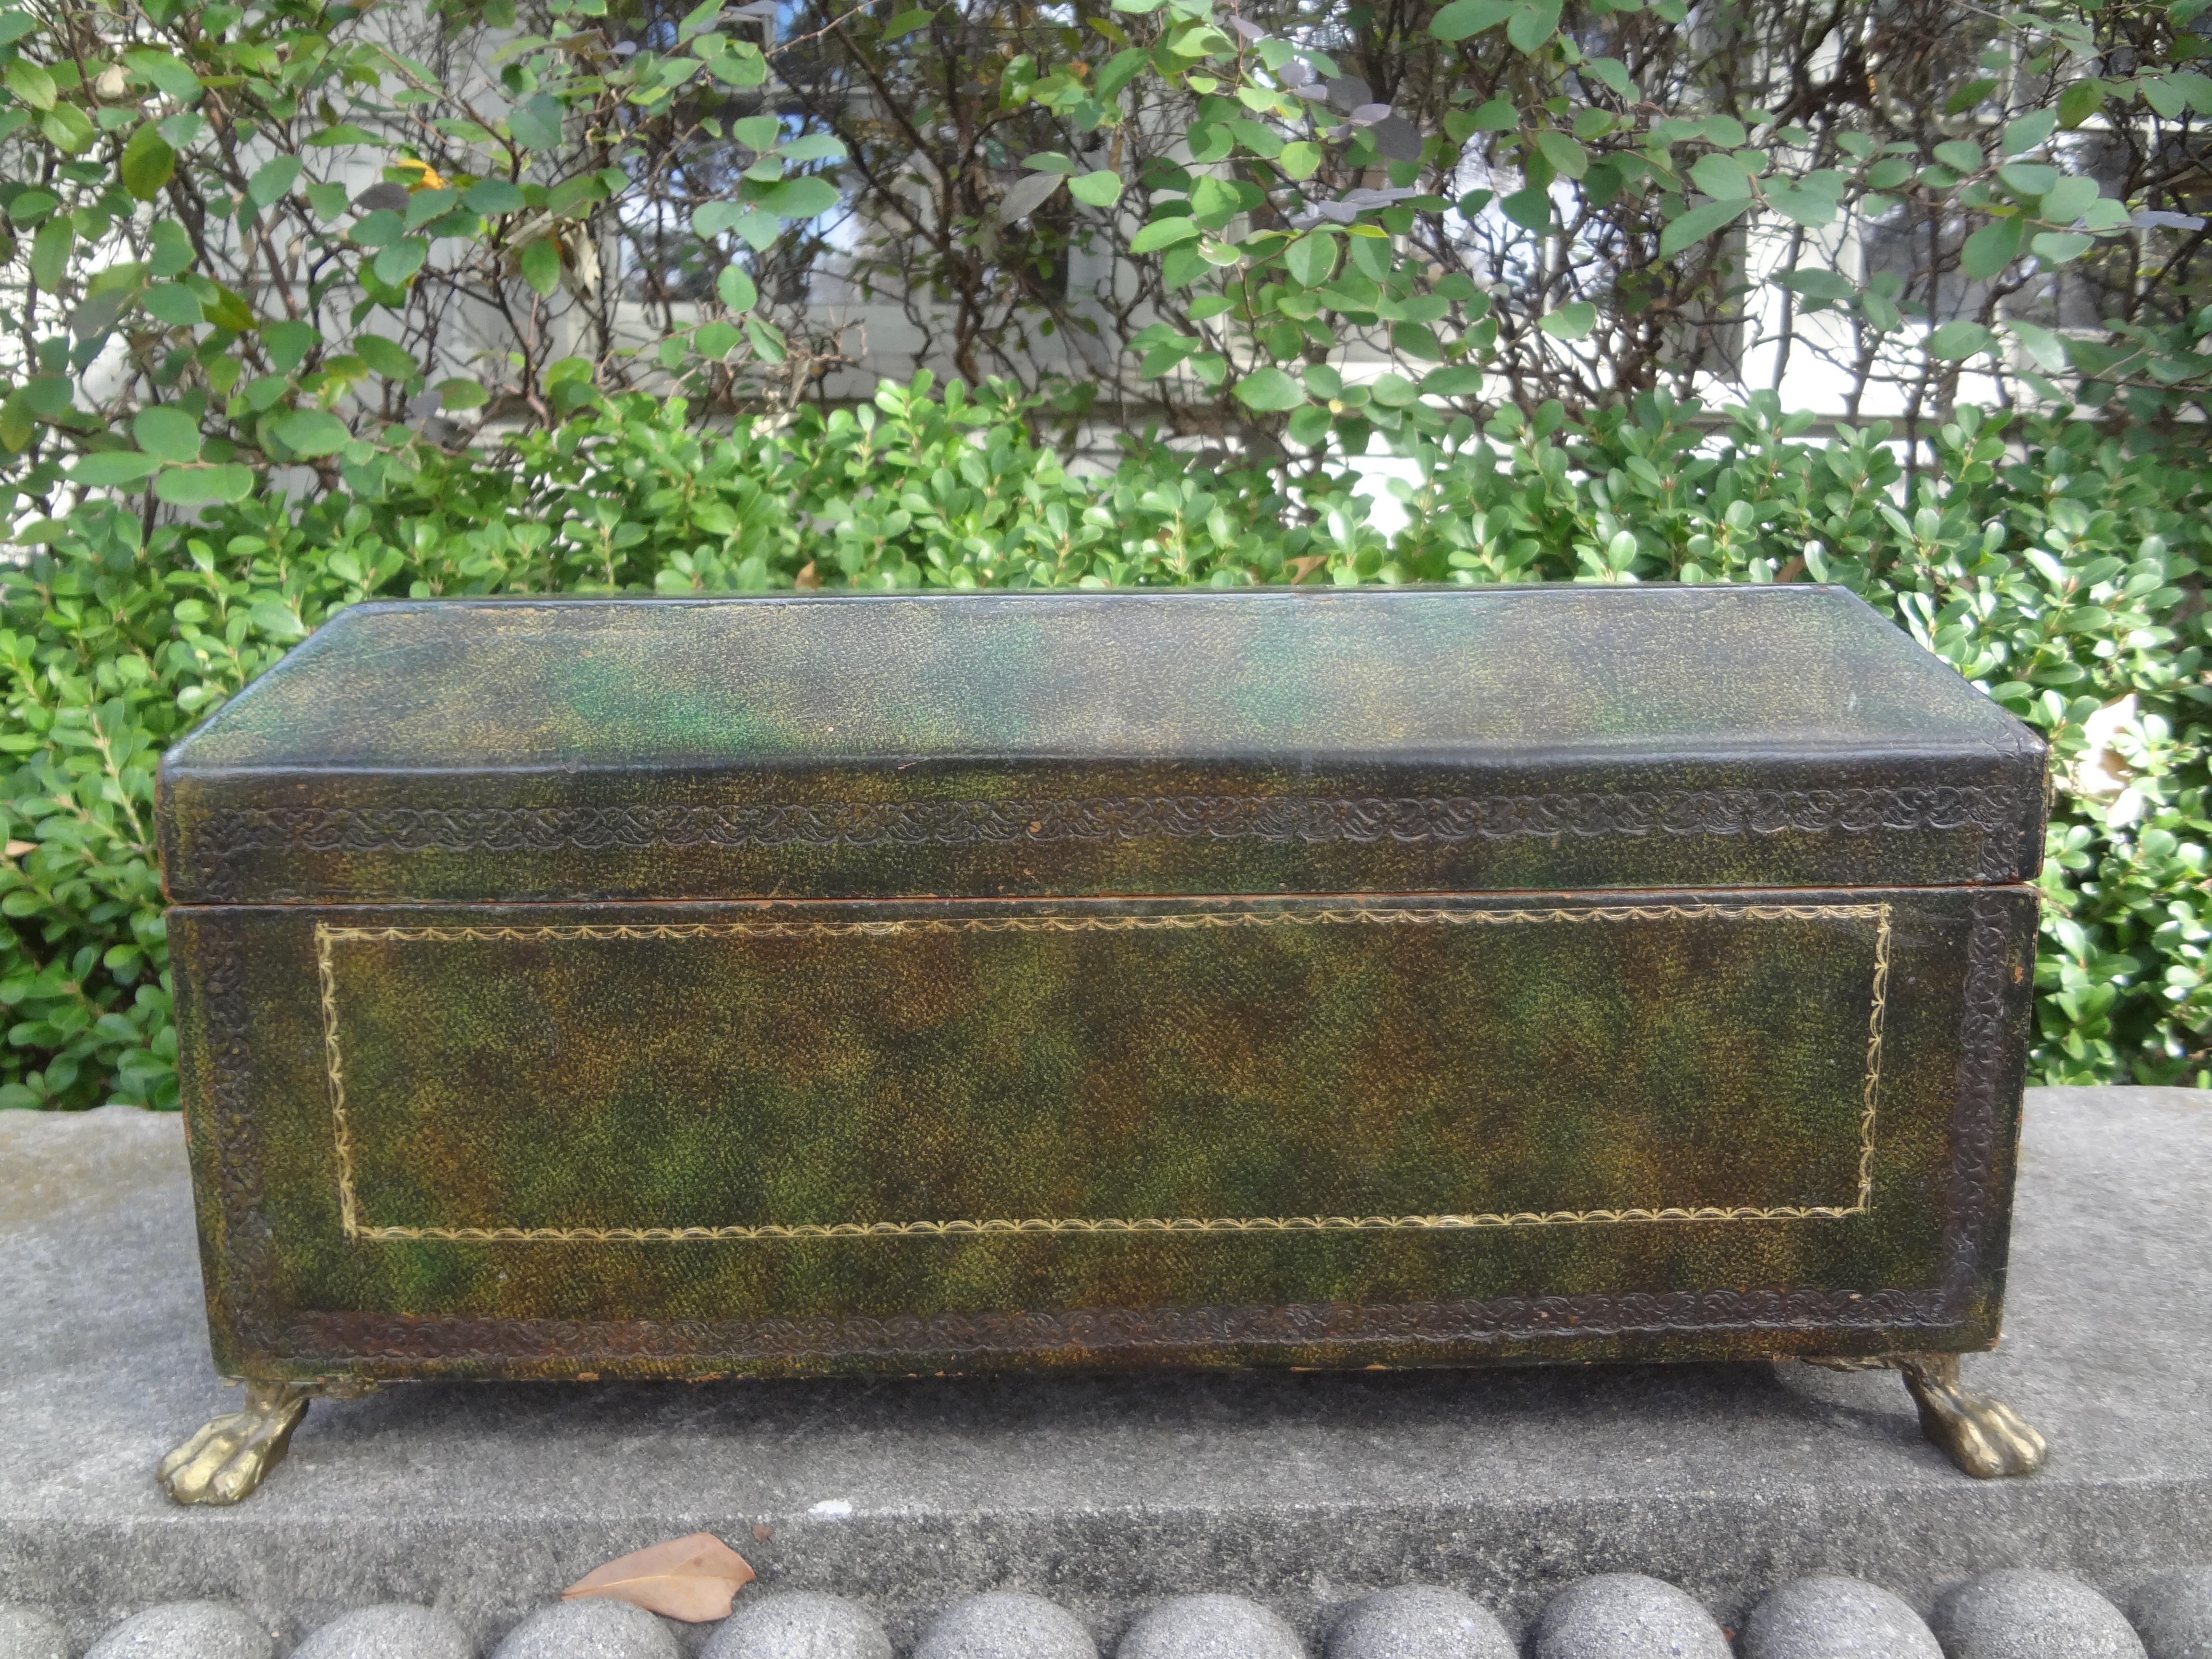 Vintage Italian Embossed Leather Box With Paw Feet.
Handsome large Italian green leather box with hand tooled gilt embossing and bronze paw feet.
Great decorative accessory for a coffee table, desk or office.